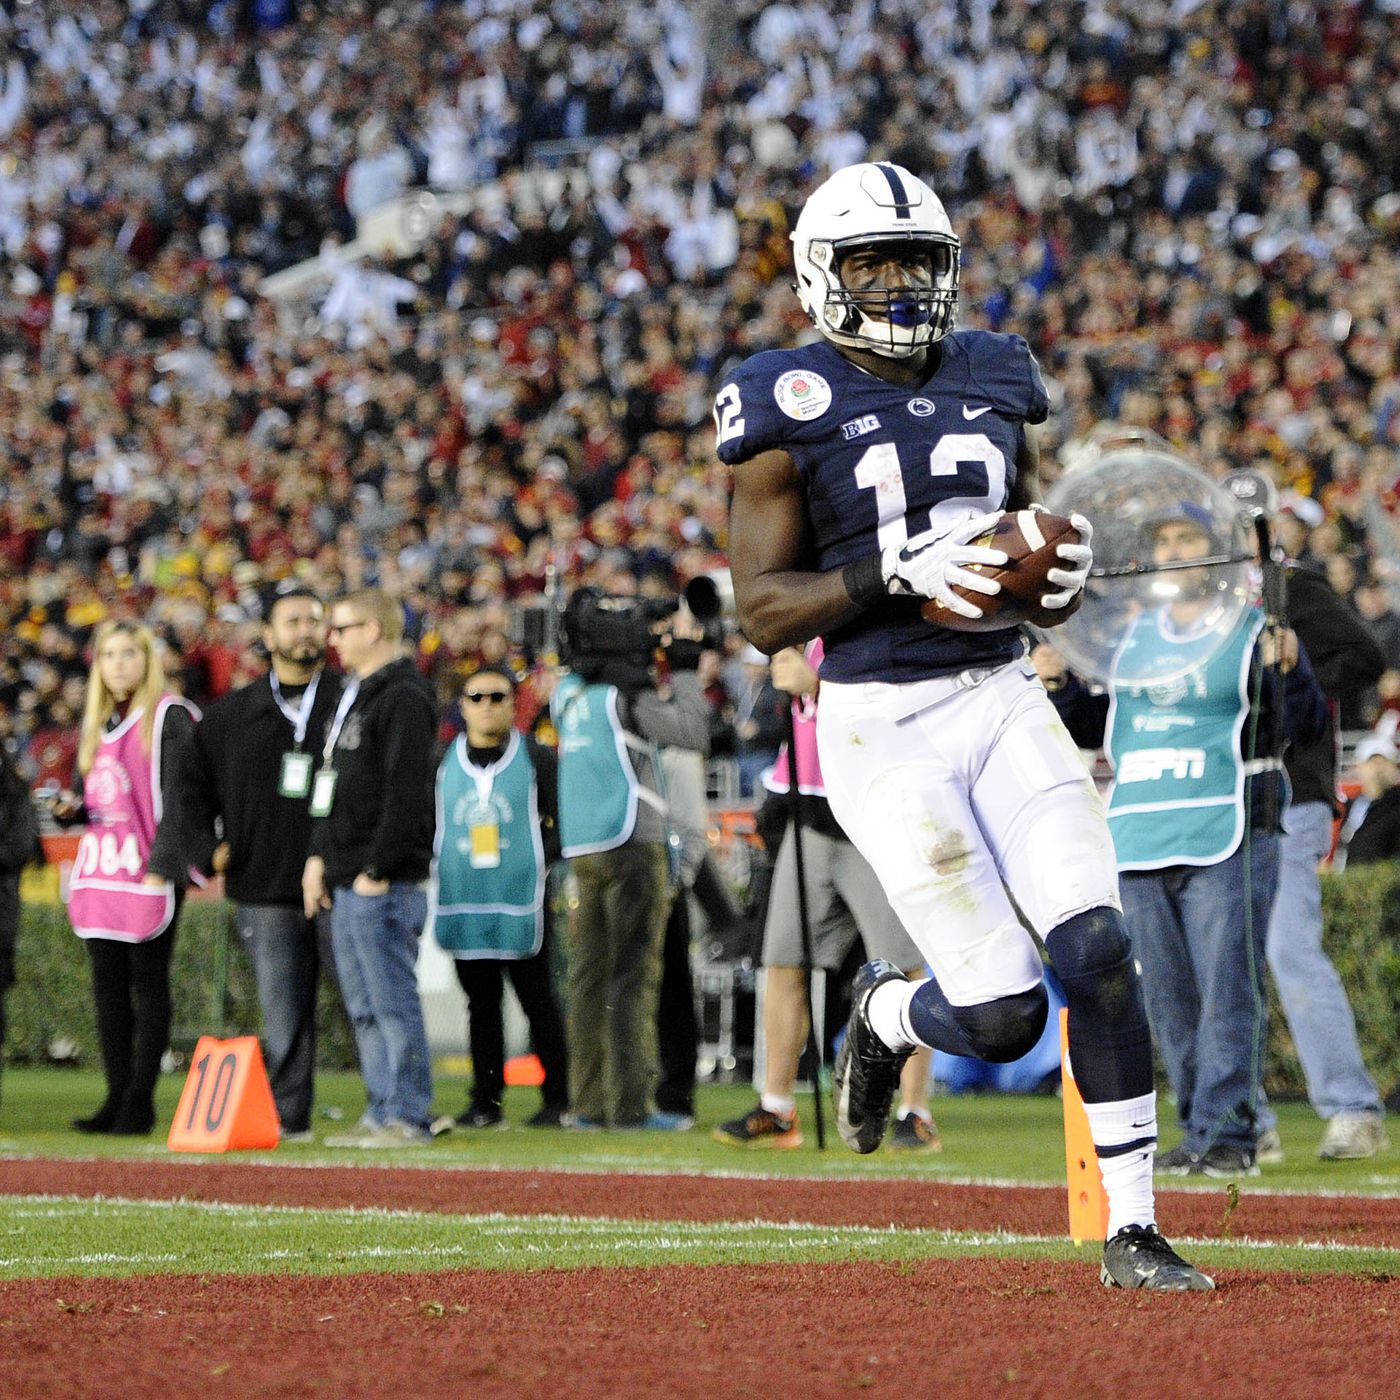 Chris Godwin, WR: Play Maker In The Rose Bowl, Could He Make Plays